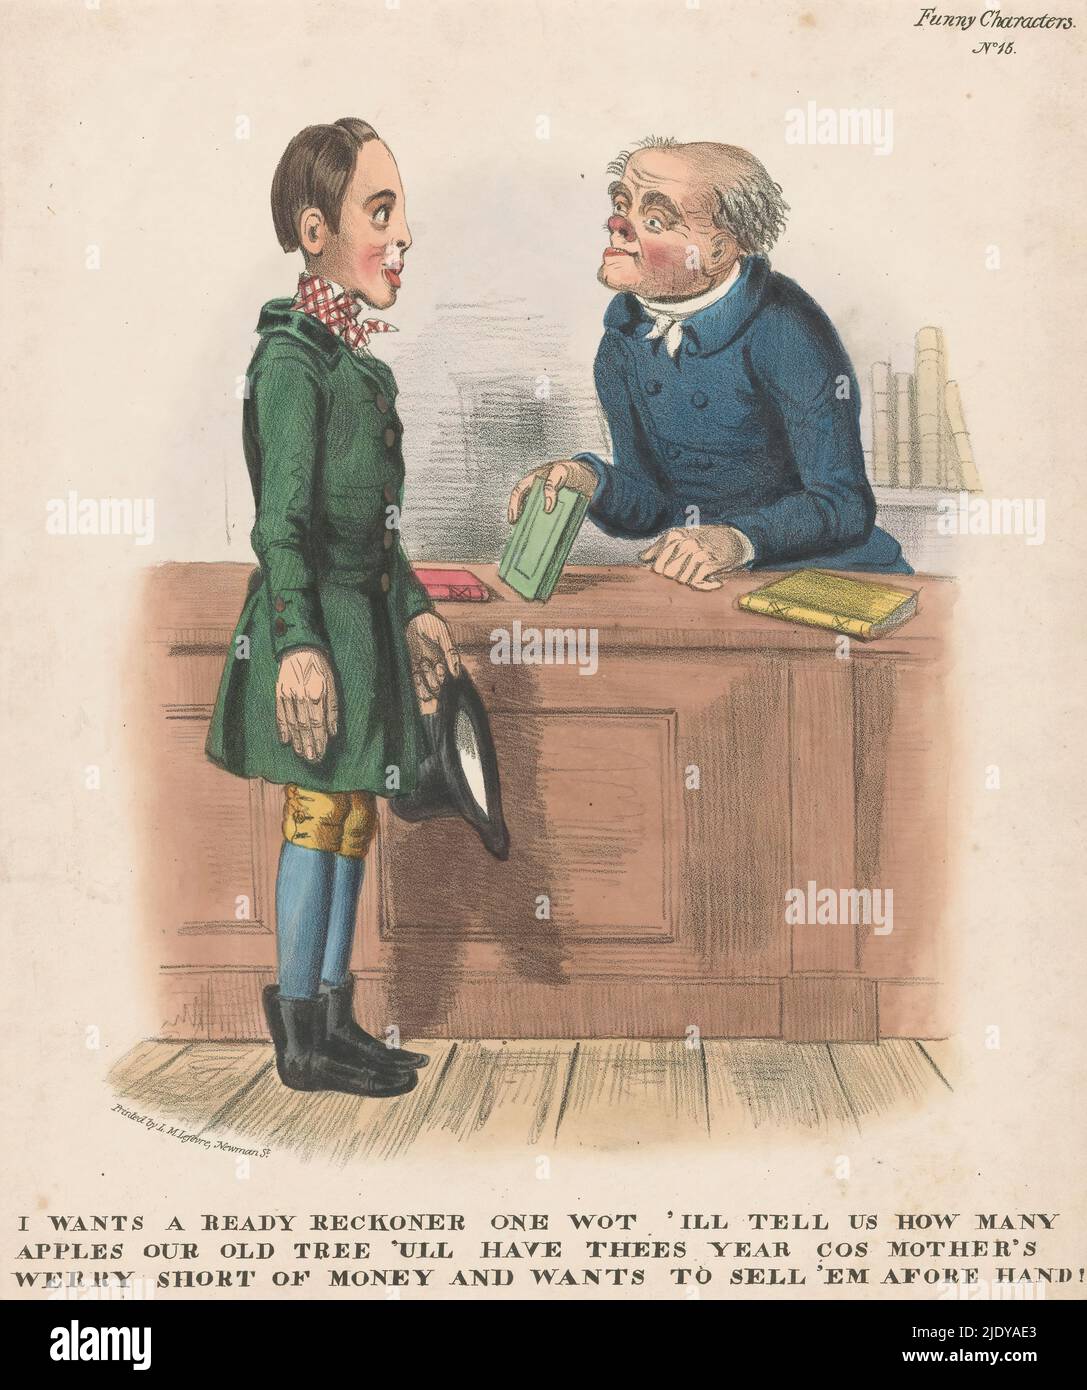 Young man in front of the counter of a bookstore, Caricatures (series title), Funny characters (series title on object), The young man asks in plain English for a book that can predict the apple harvest of the coming year., print maker: anonymous, printer: Louis Marie Lefevre, (mentioned on object), publisher: William Spooner, (possibly), London, c. 1832 - c. 1838, paper, height 290 mm × width 241 mm Stock Photo